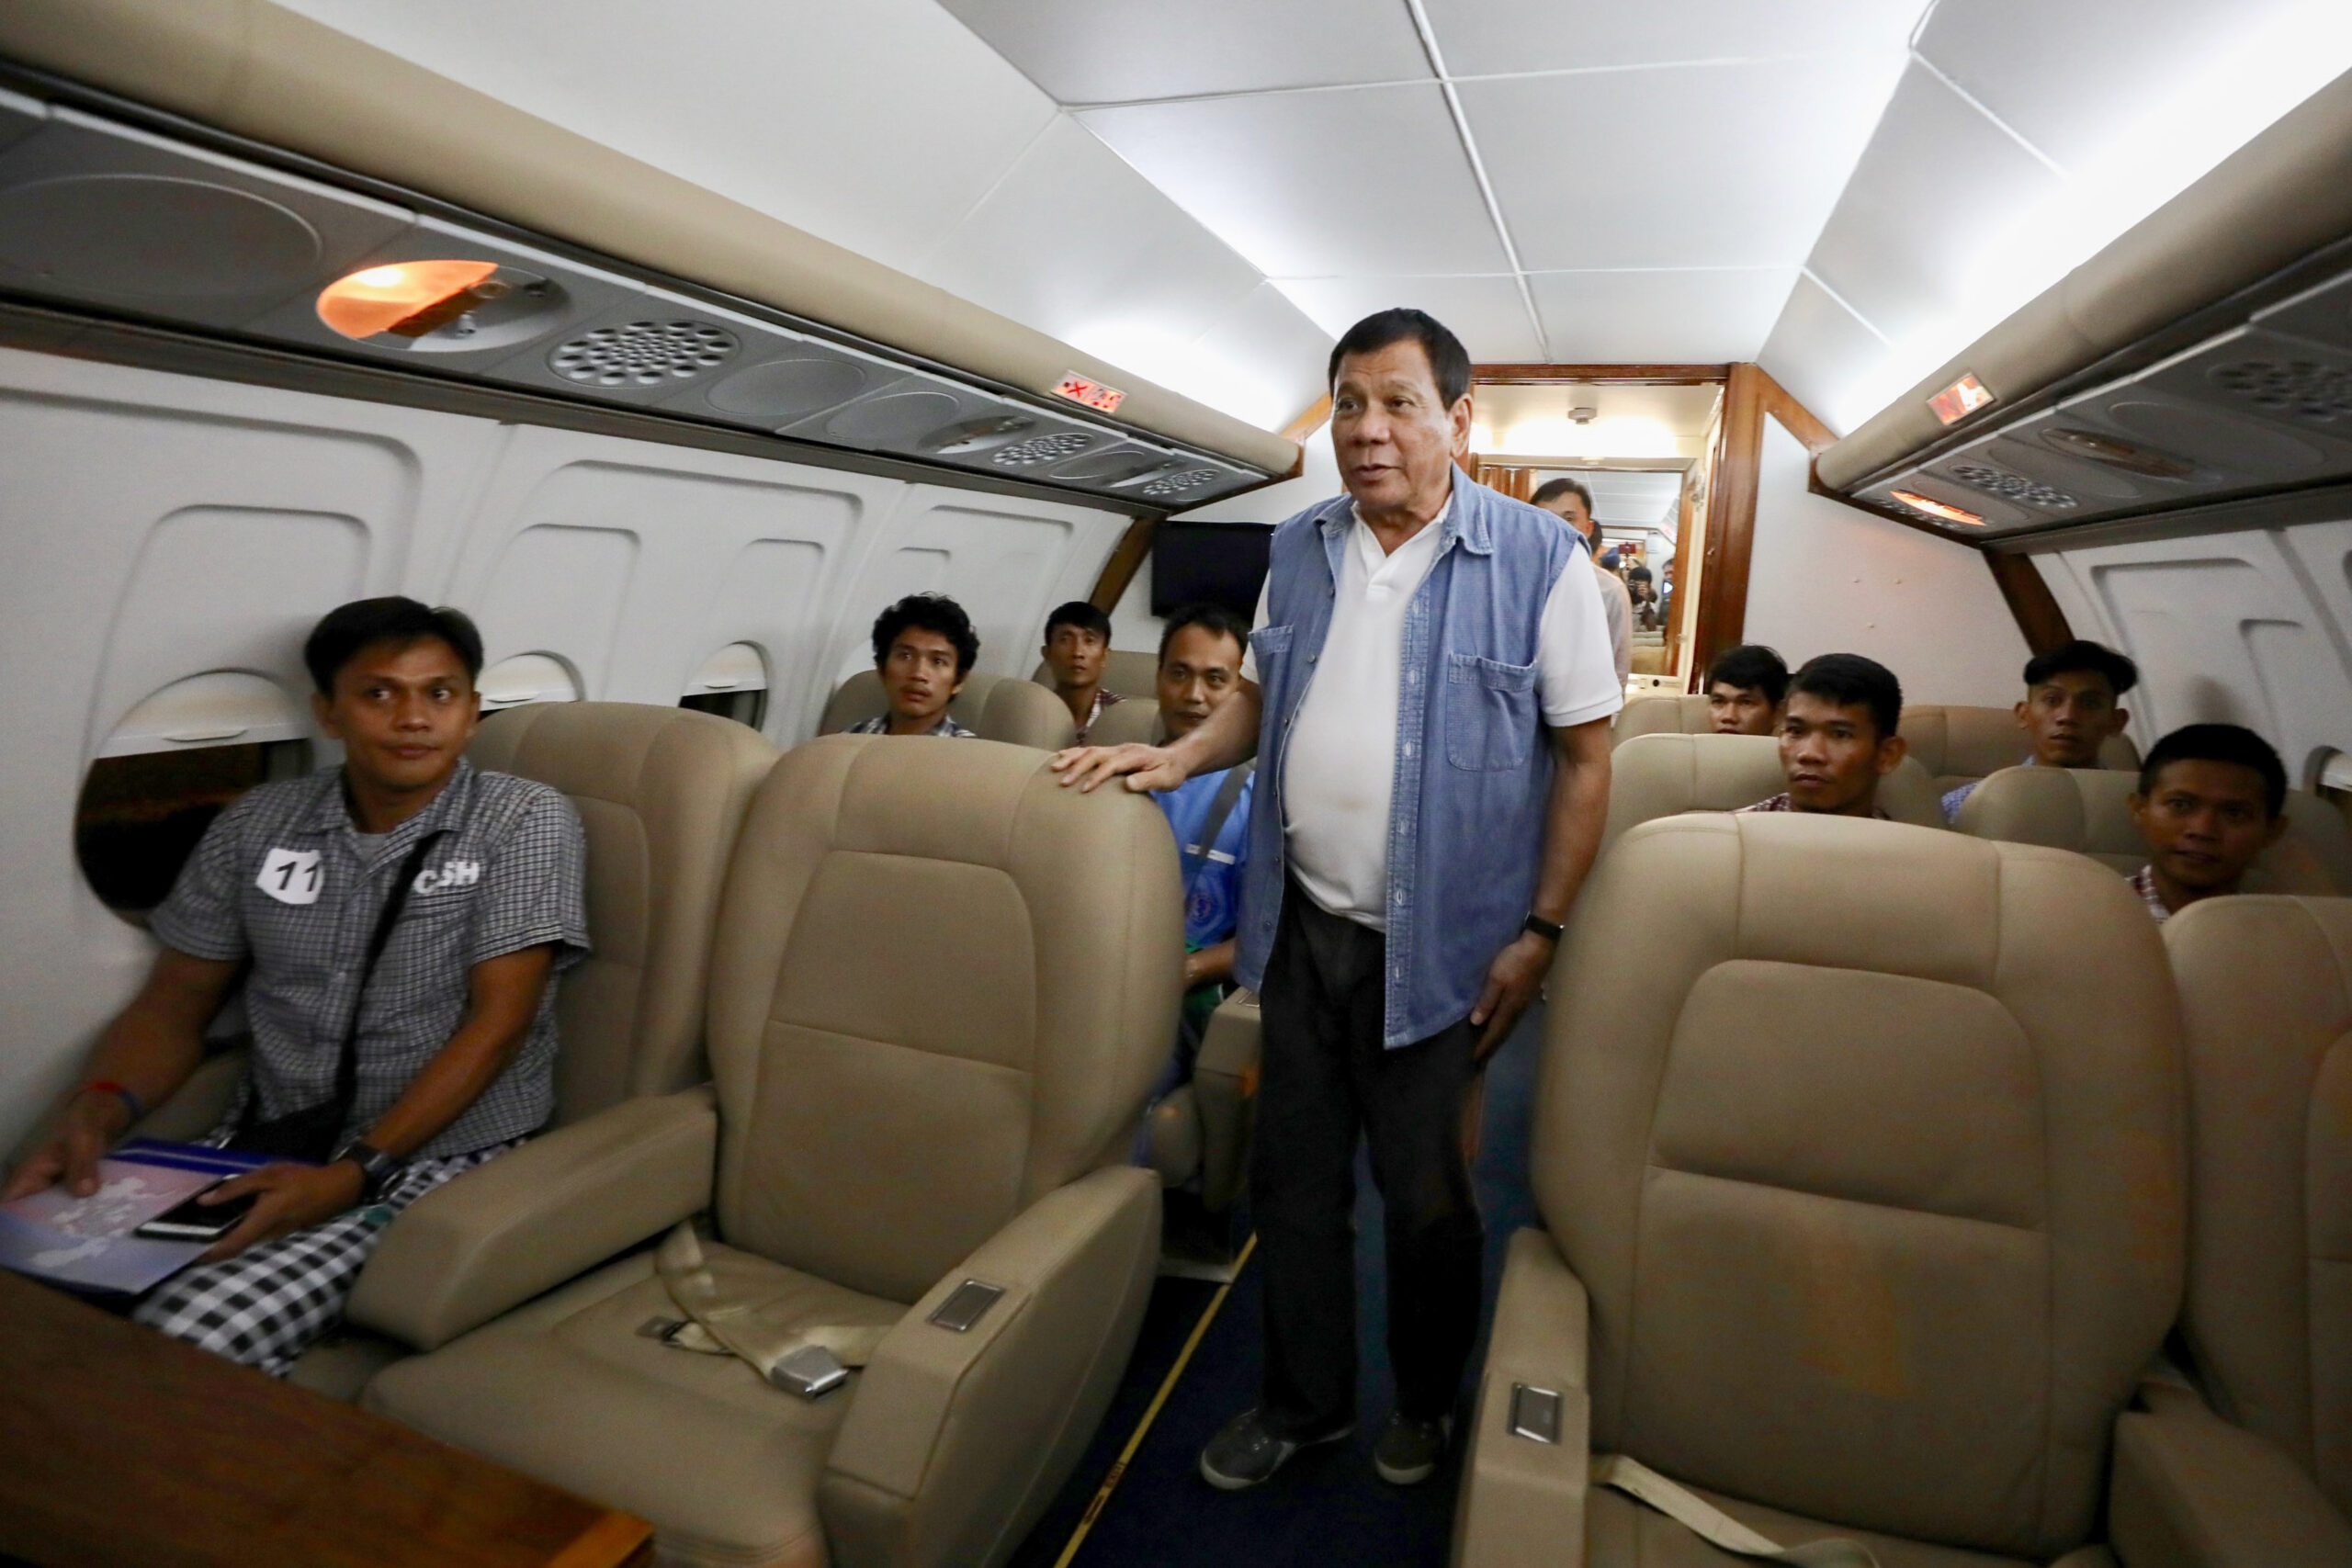 IN PHOTOS: Duterte gives wounded soldiers a lift on presidential plane